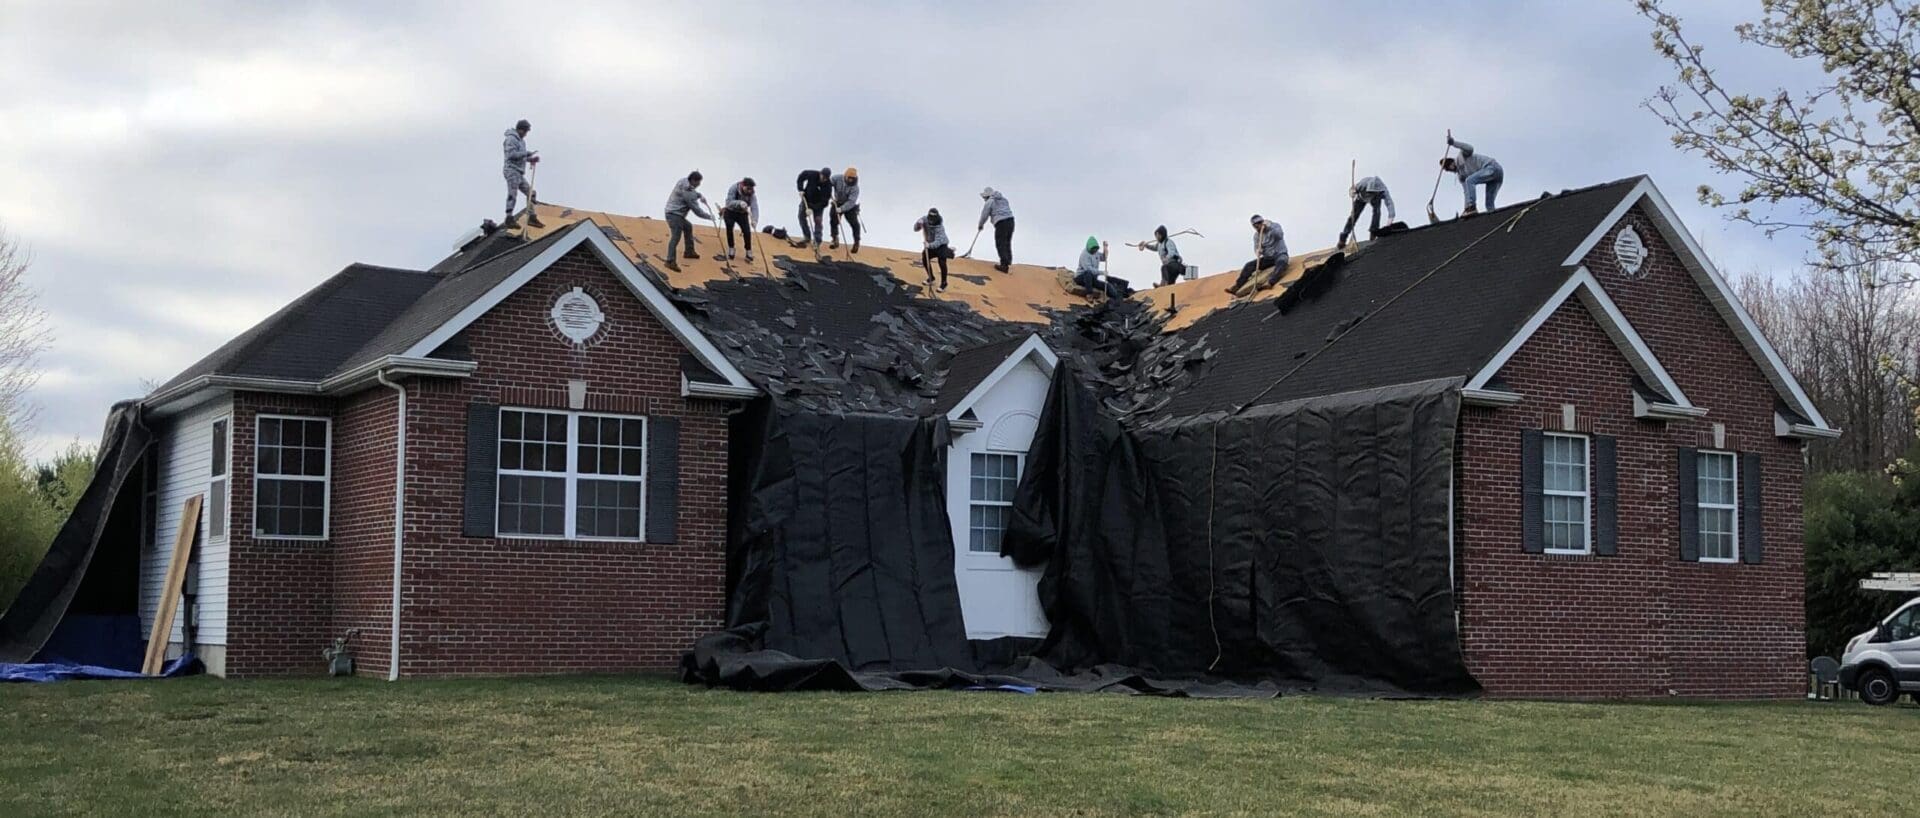 A group of people working on the roof of a house.